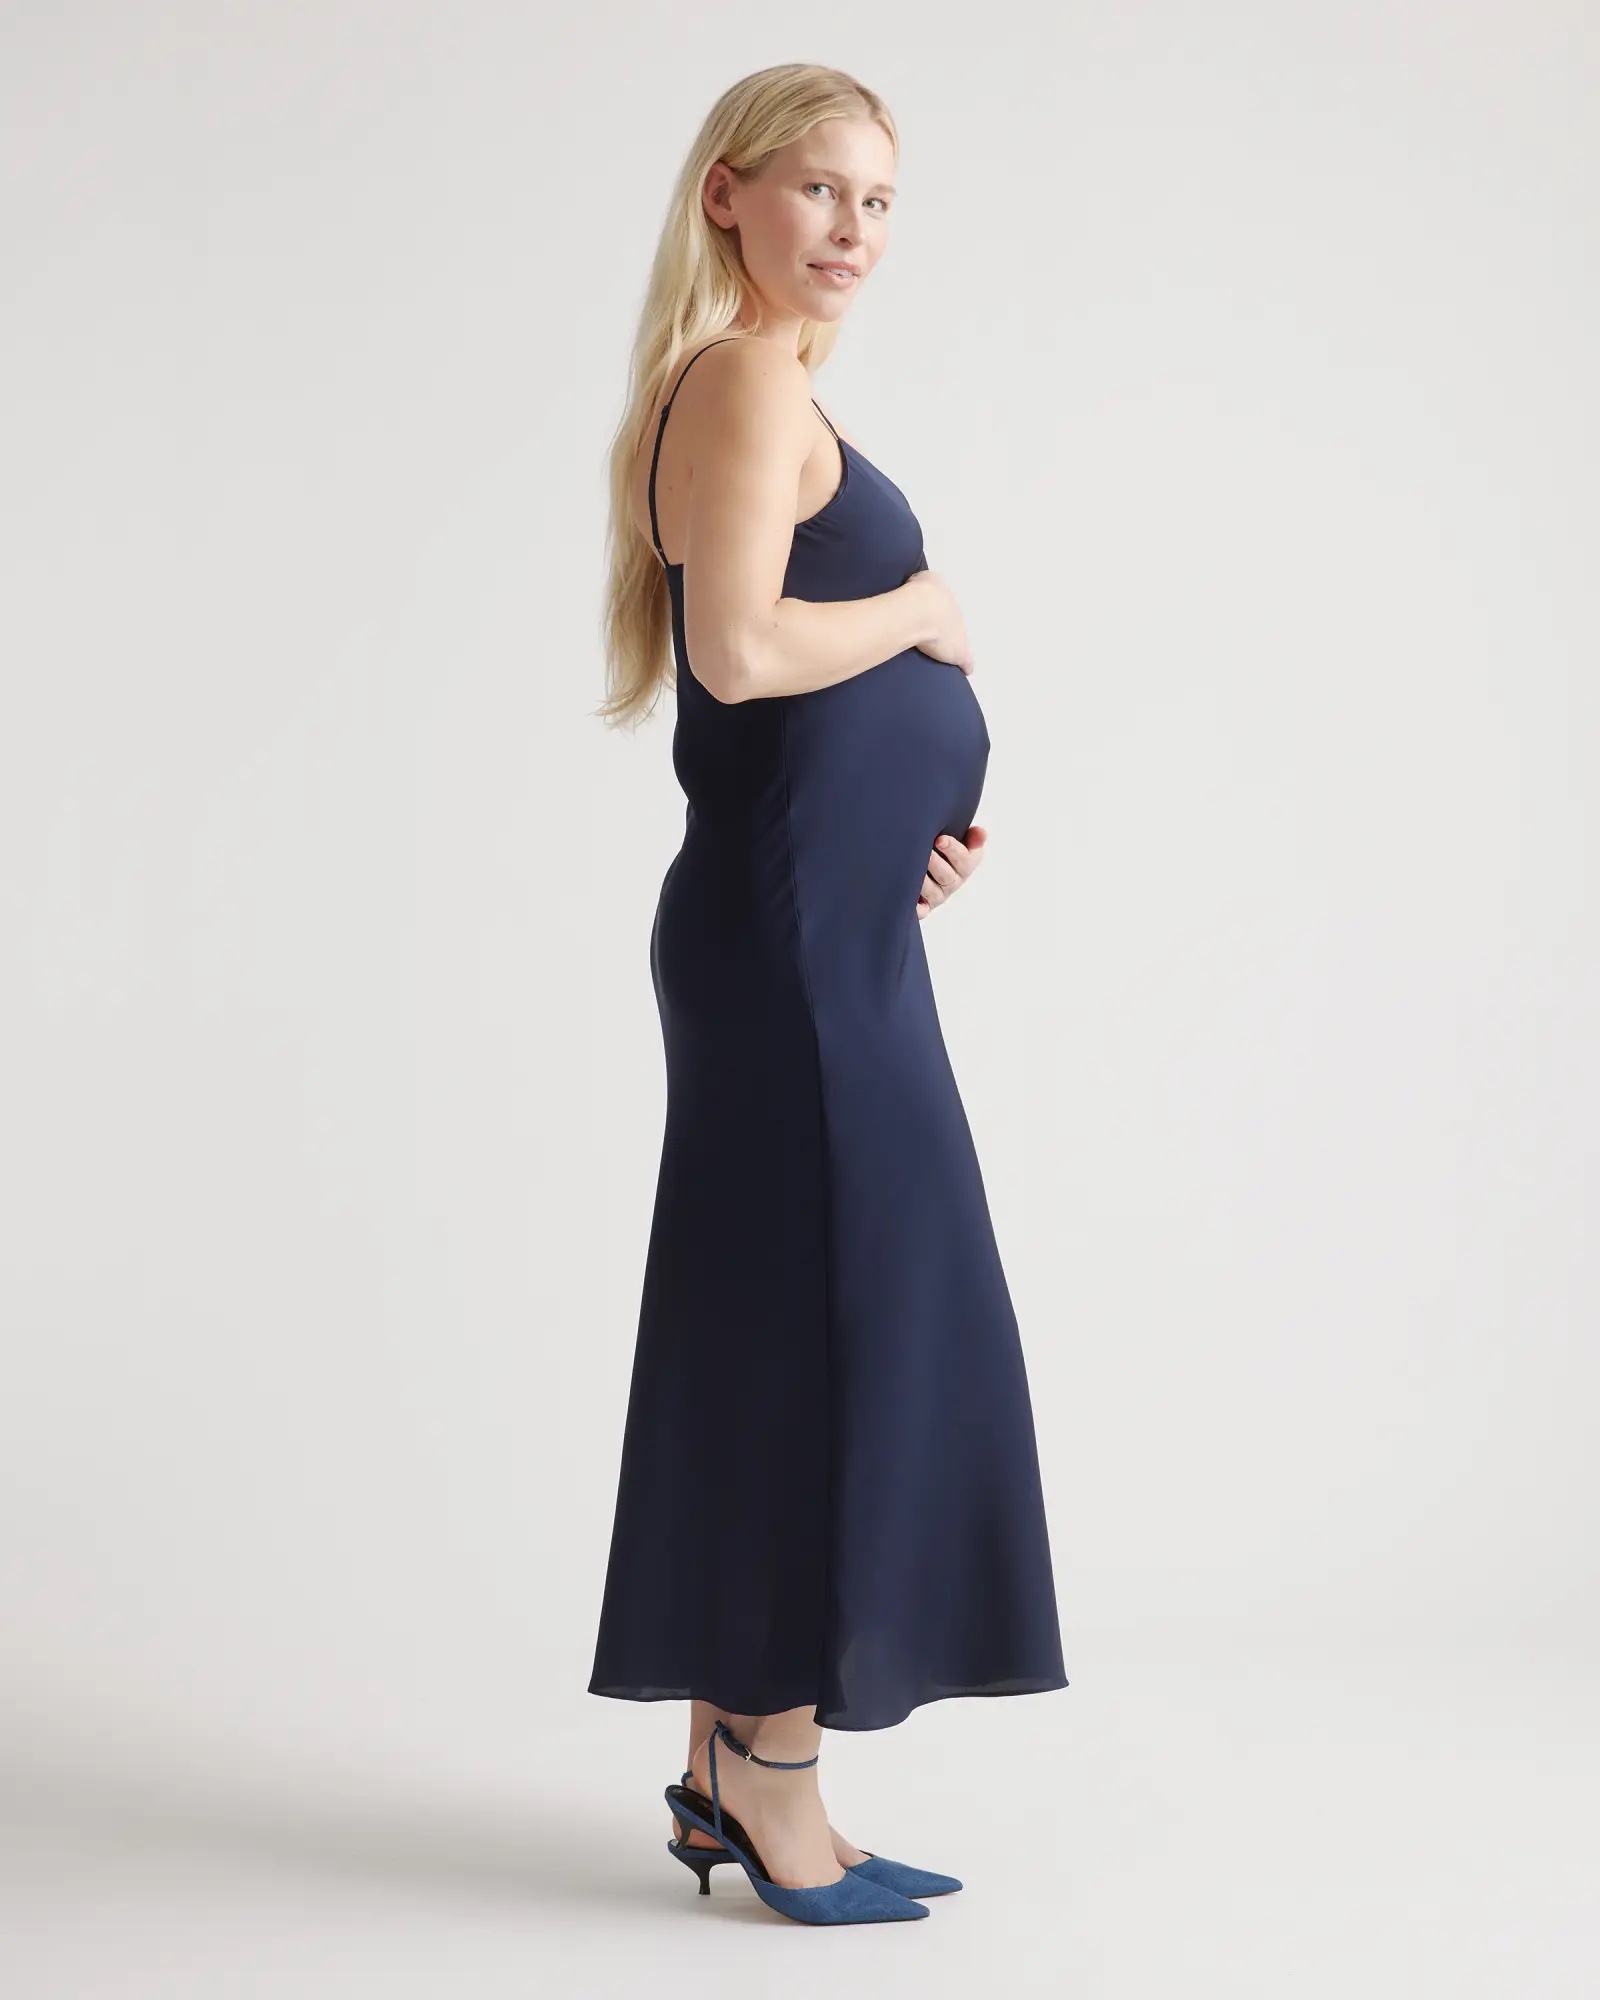 A model in a navy silk slip dress holds her baby bump.